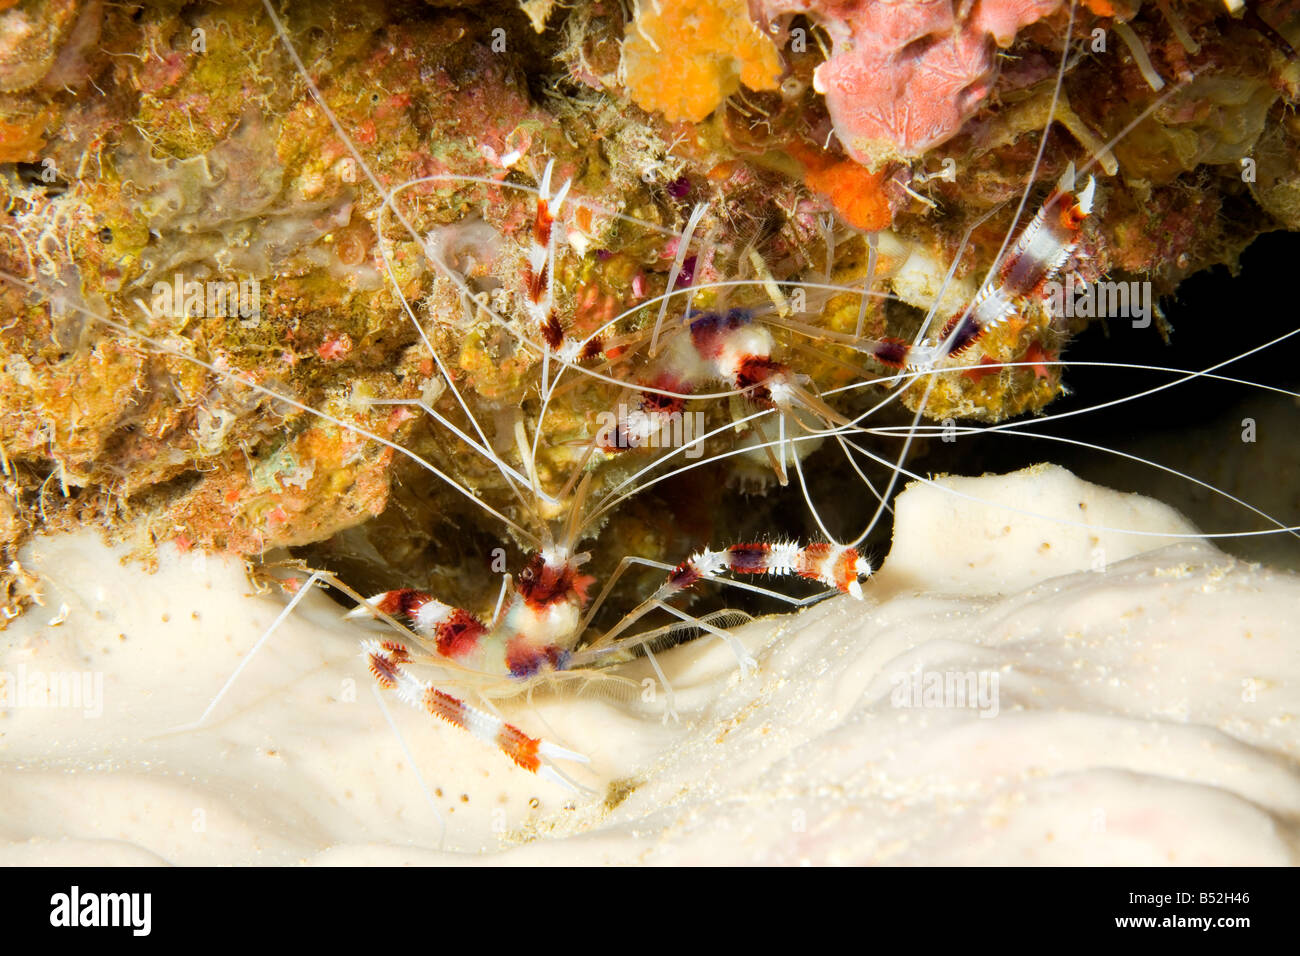 Banded coral shrimps Stenopus hispidus. Mated pair living together on the reef. The female is at the bottom. Stock Photo